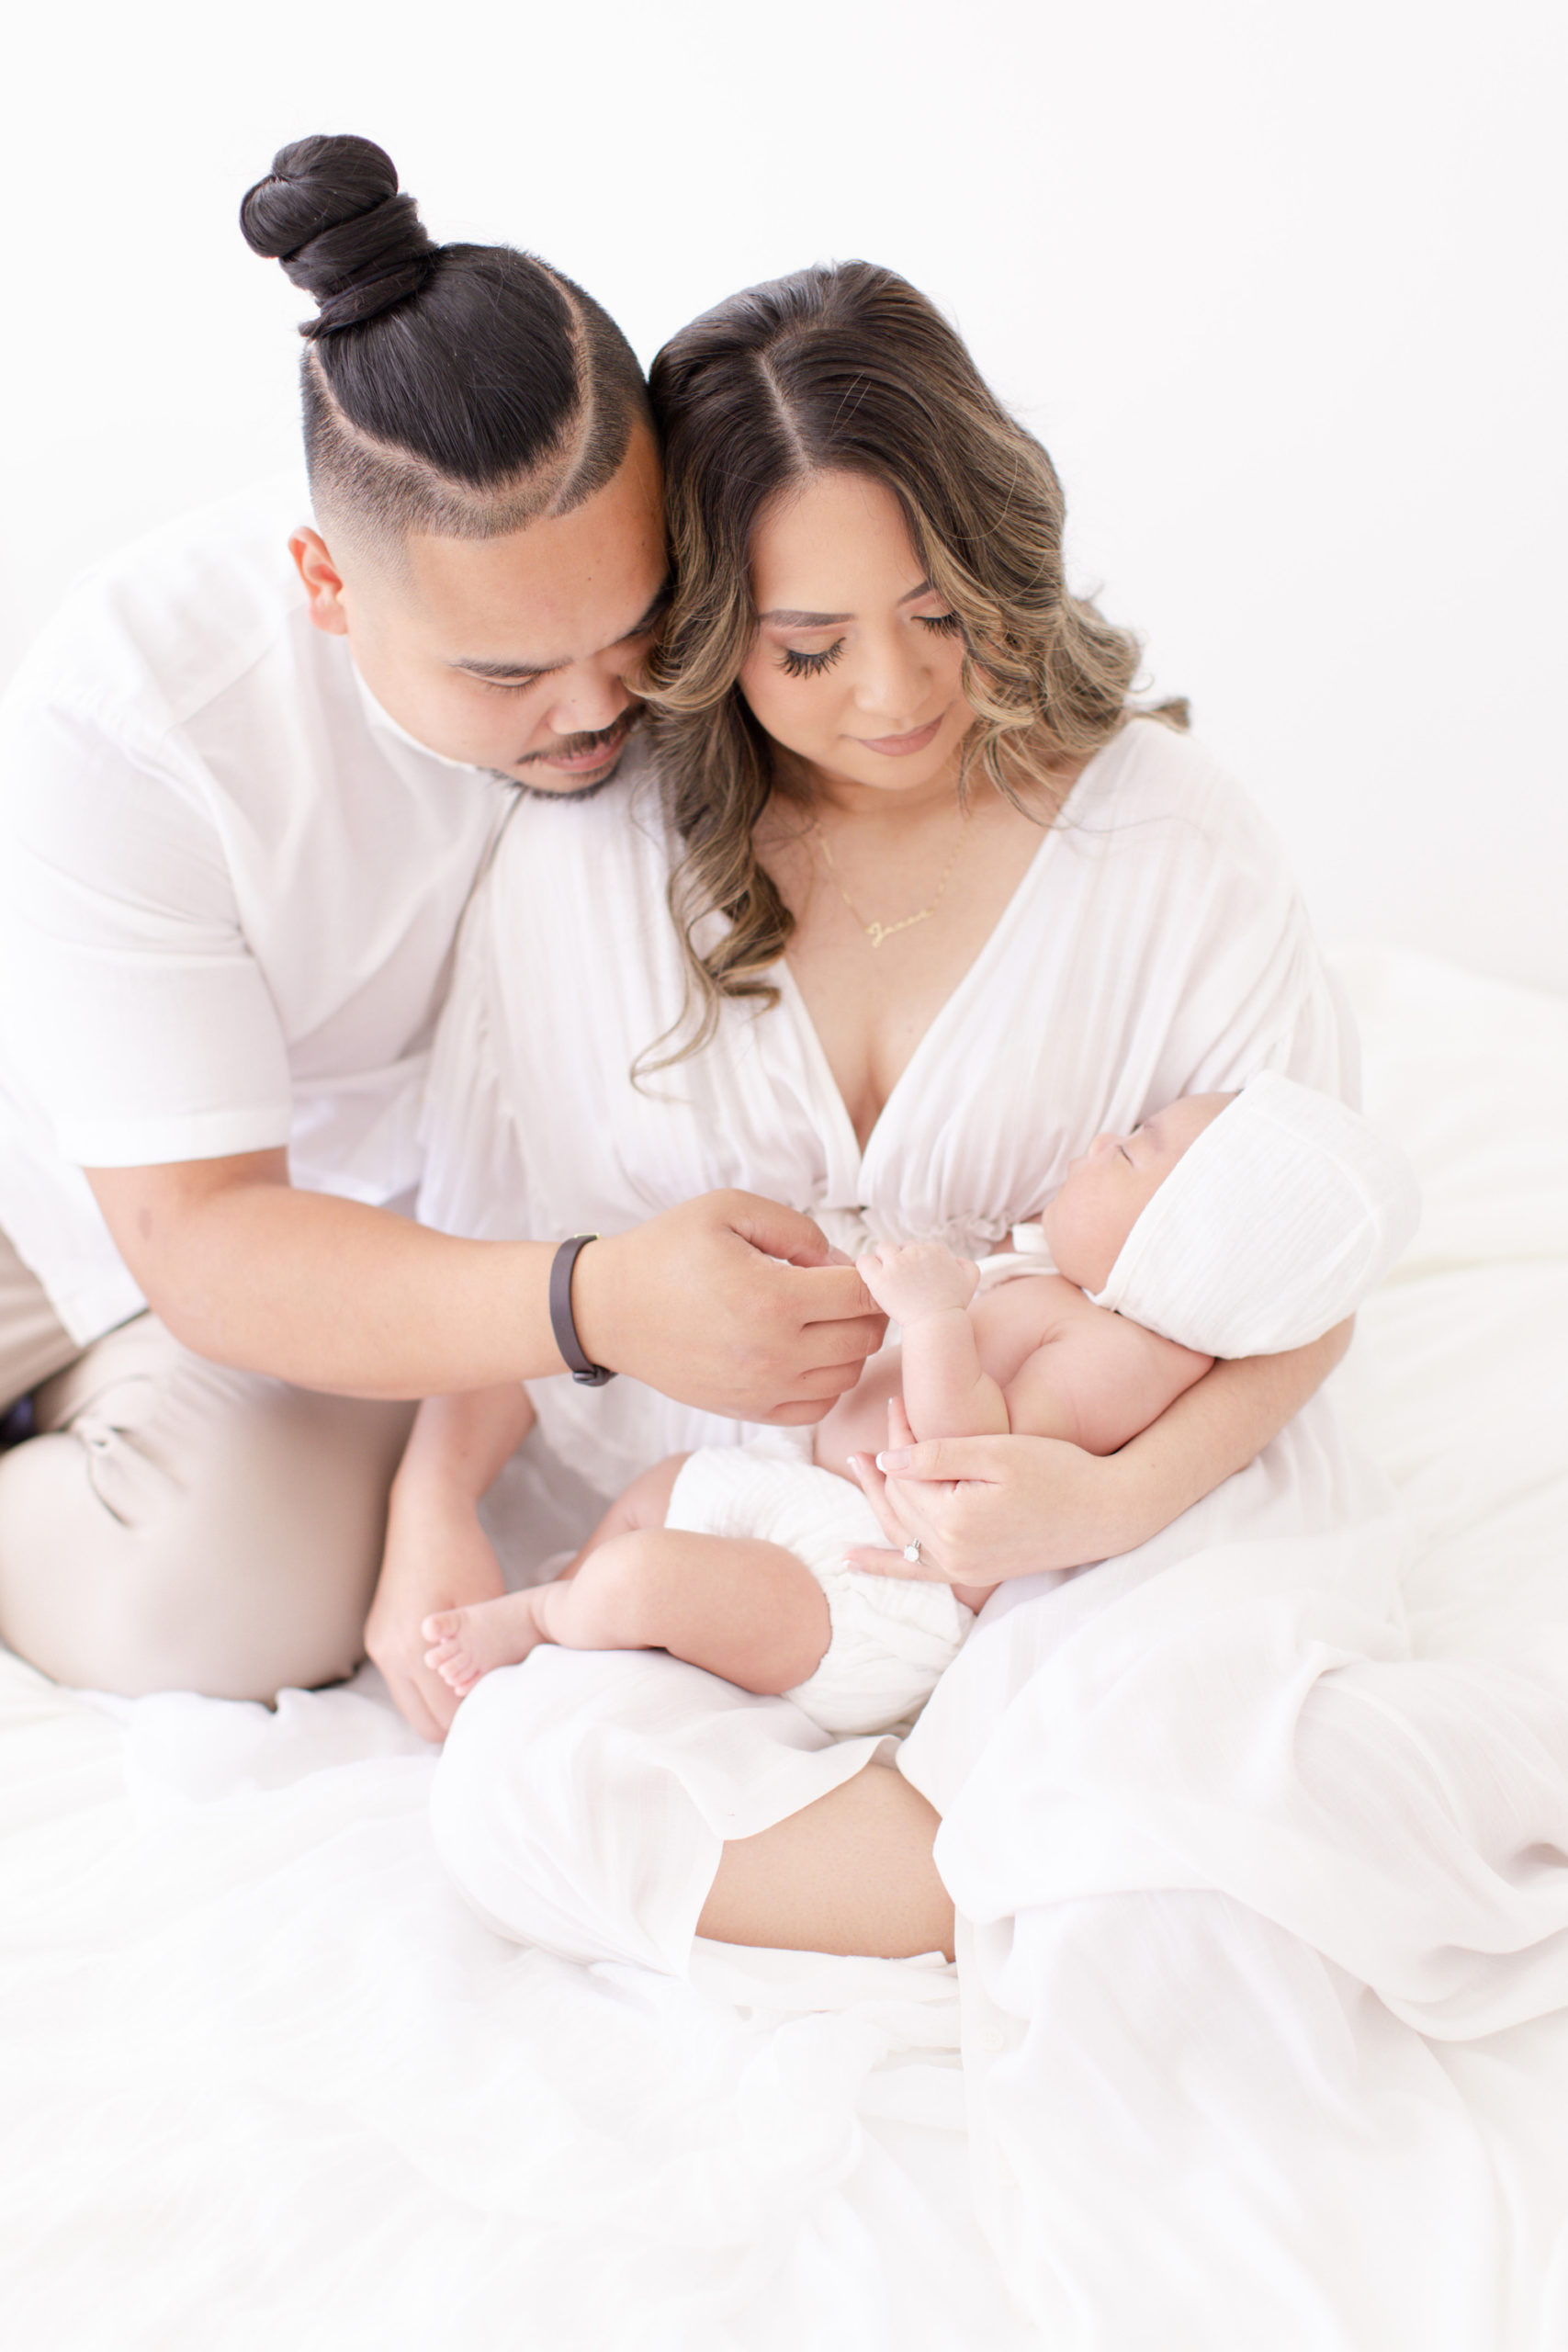 Multi - Session Pregnancy, Maternity, Newborn and Baby Photoshoot Collections